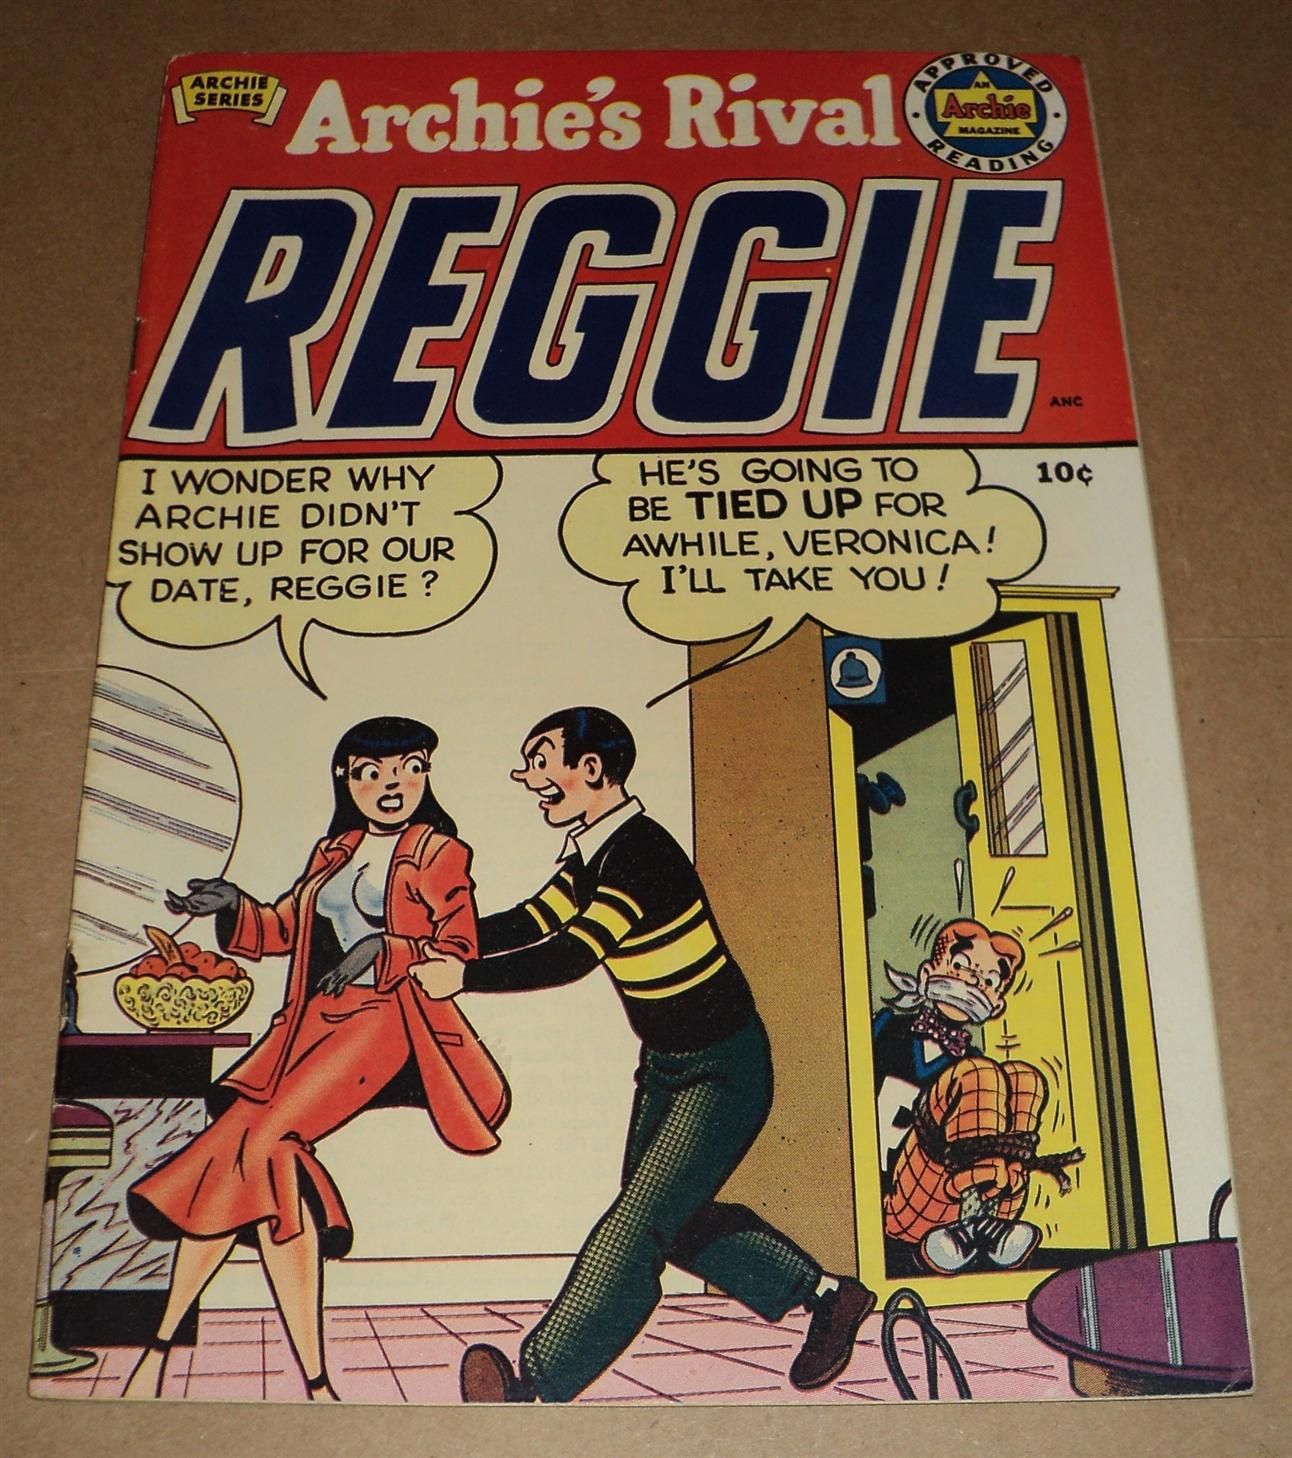 Archies Rival Reggie #1 (1949) NICE 1st Issue comic book (id# 6949)